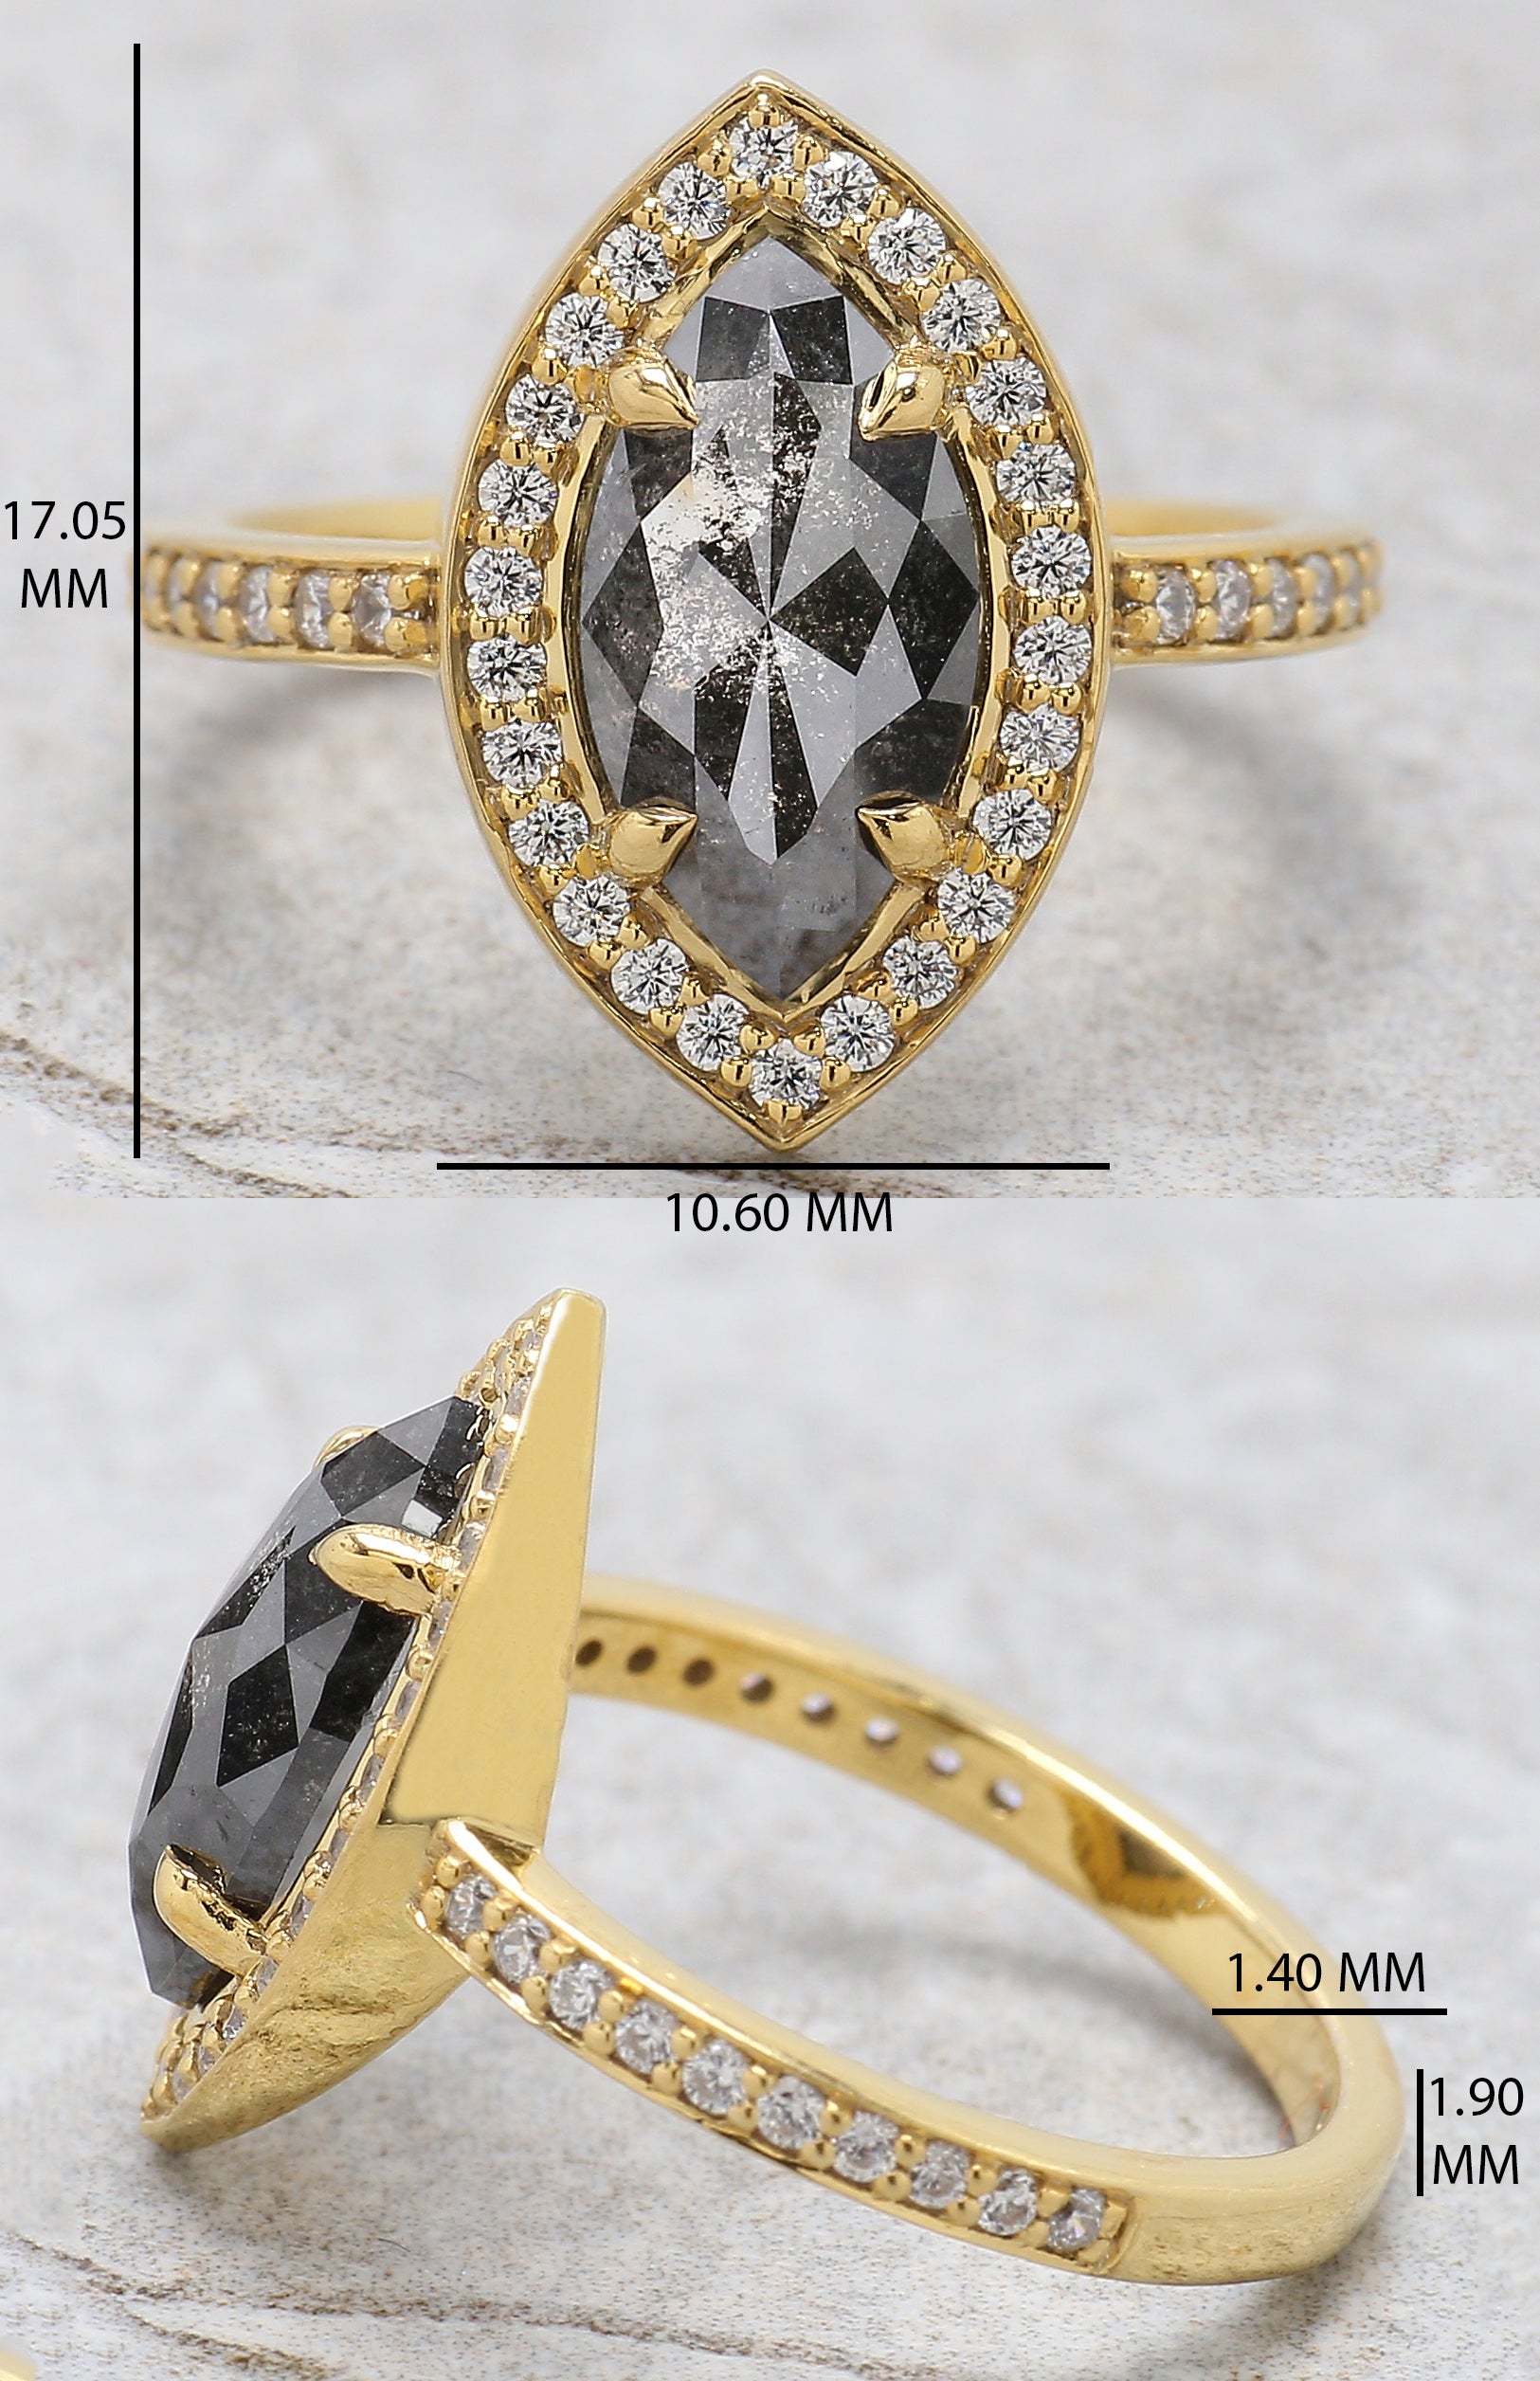 Marquise Cut Salt And Pepper Diamond Ring 1.81 Ct 11.70 MM Marquise Diamond Ring 14K Solid Yellow Gold Engagement Ring Gift For Her QL2091